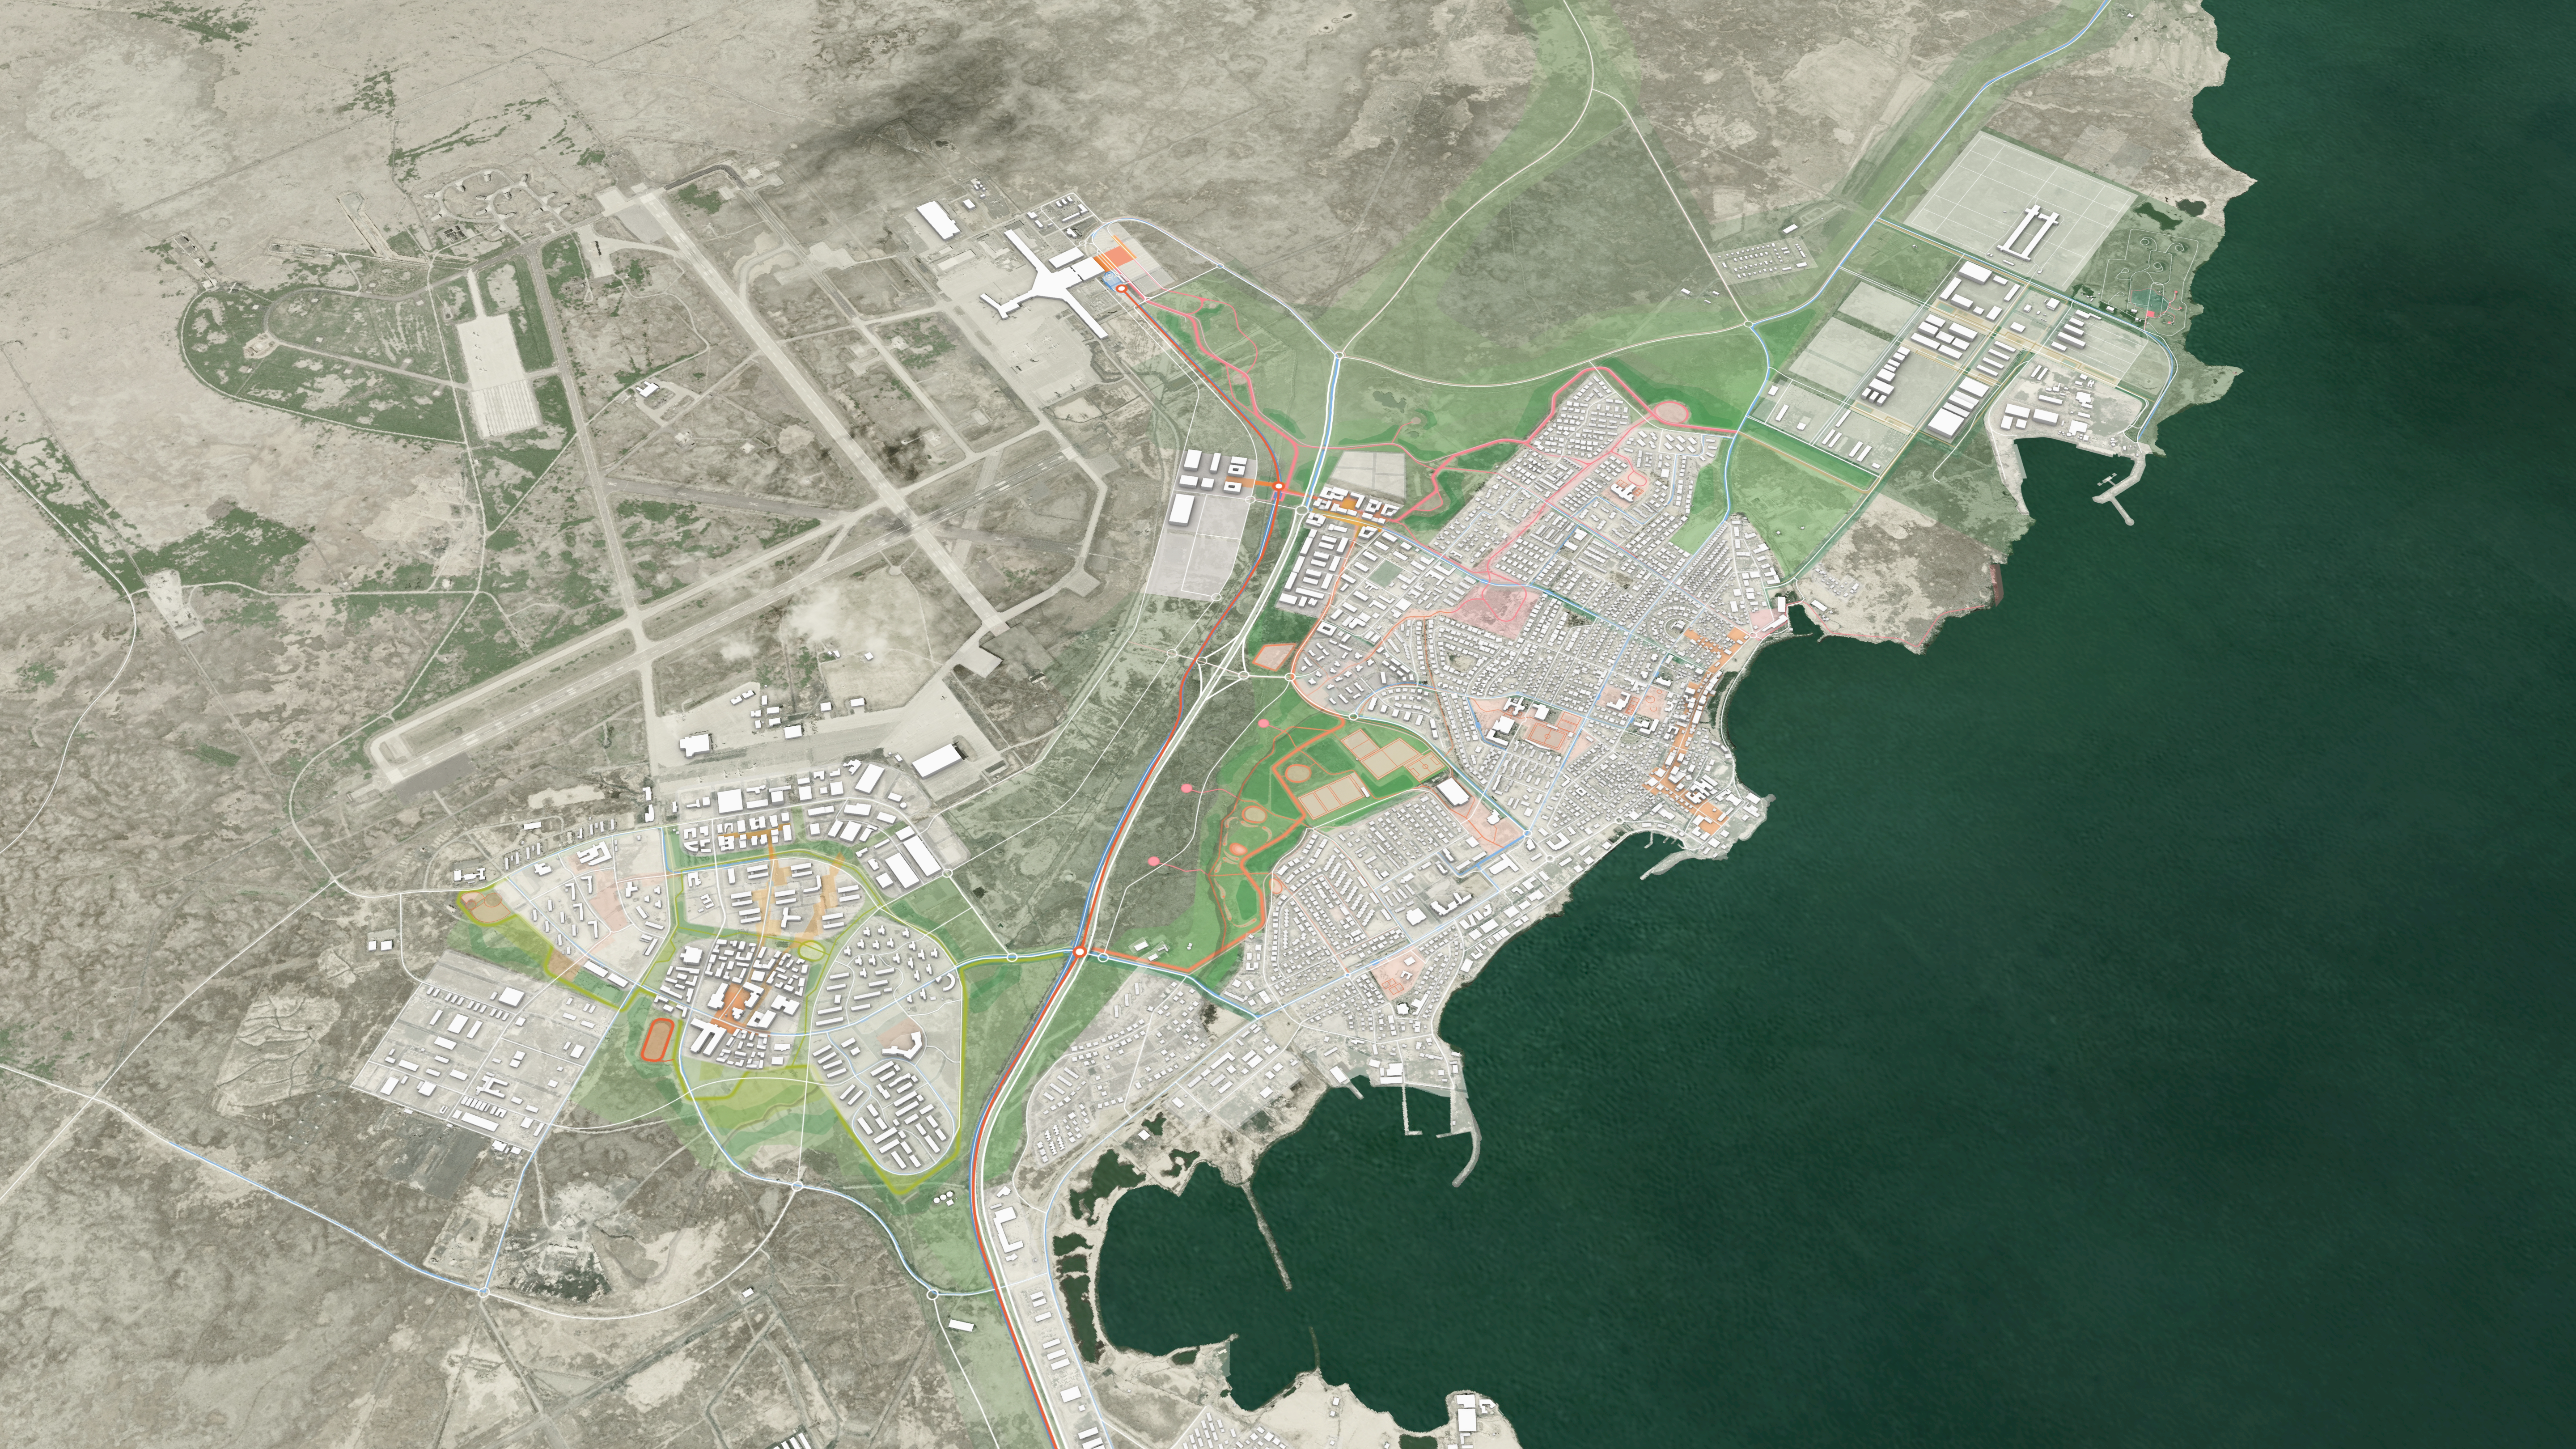 Strategic Masterplan for Keflavík Airport Area continues stakeholder engagements!